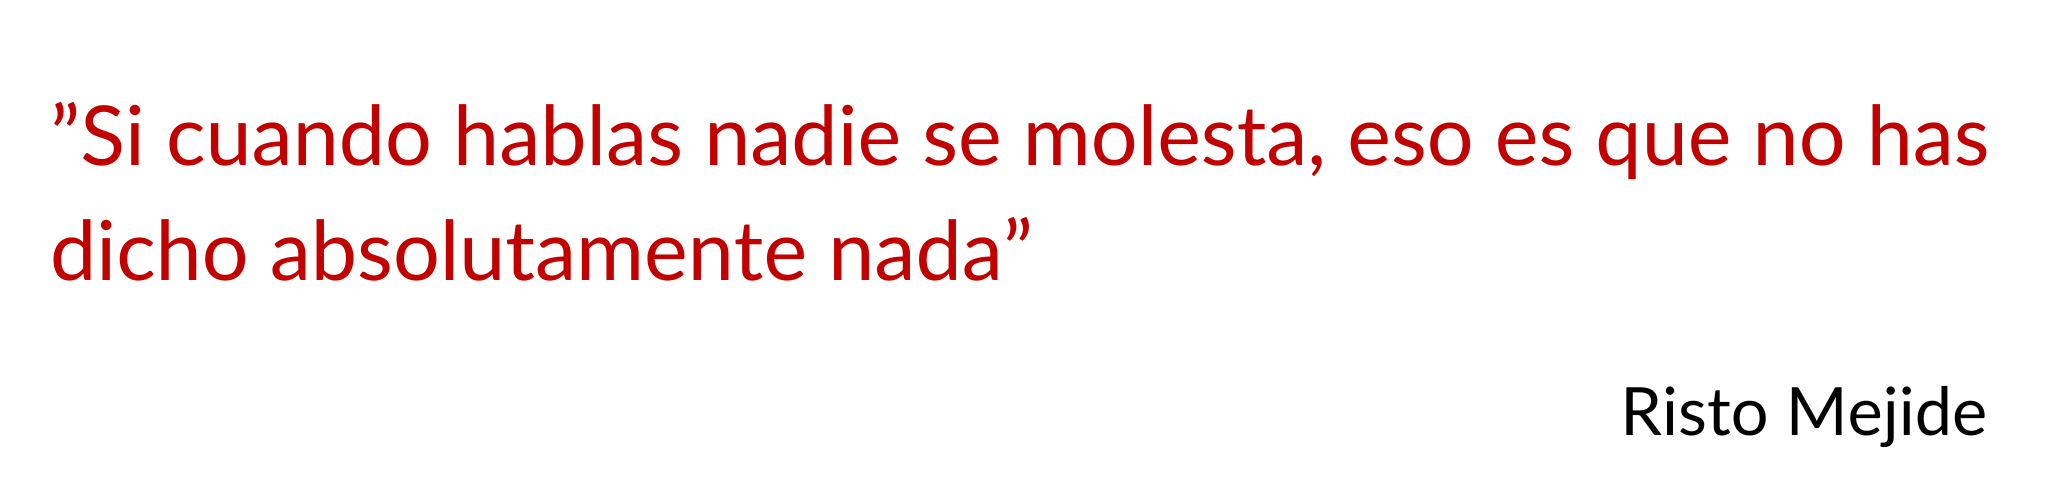 Frases web (2048 × 500 px) (1)